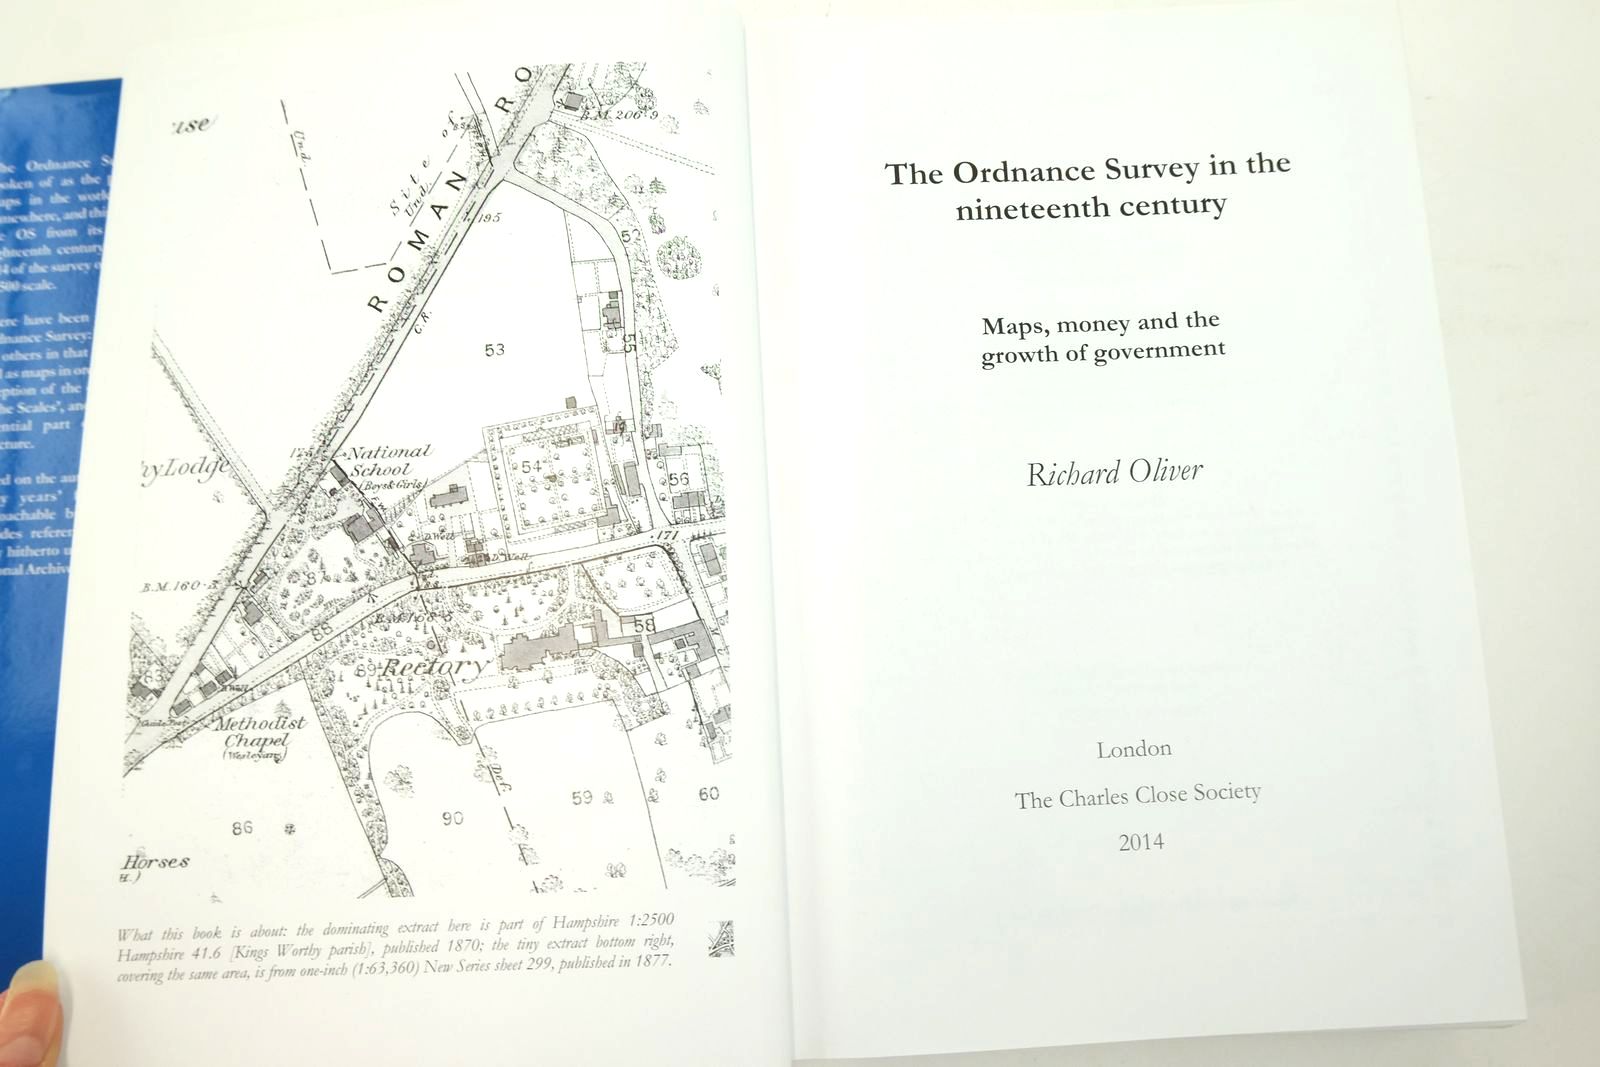 Photo of THE ORDNANCE SURVEY IN THE NINETEENTH CENTURY: MAPS, MONEY AND THE GROWTH OF GOVERNMENT written by Oliver, Richard published by Charles Close Society (STOCK CODE: 2140529)  for sale by Stella & Rose's Books